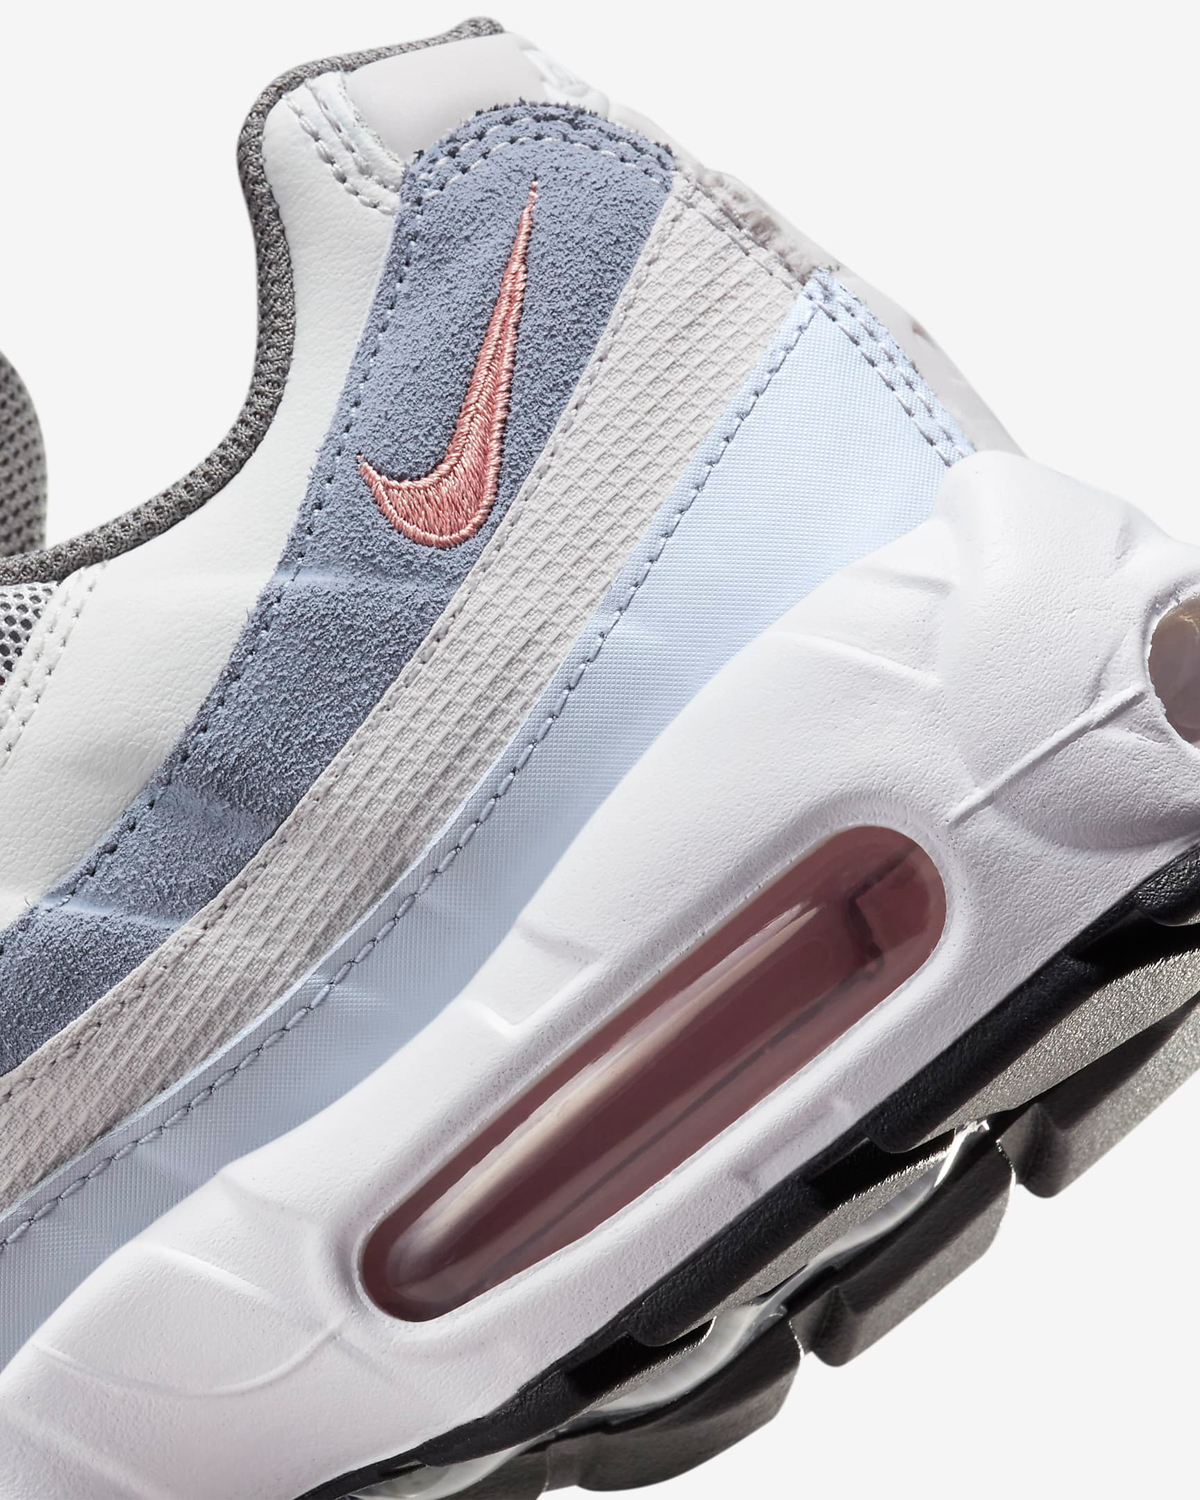 Nike-Air-Max-95-Vast-Grey-Red-Stardust-Release-Date-8